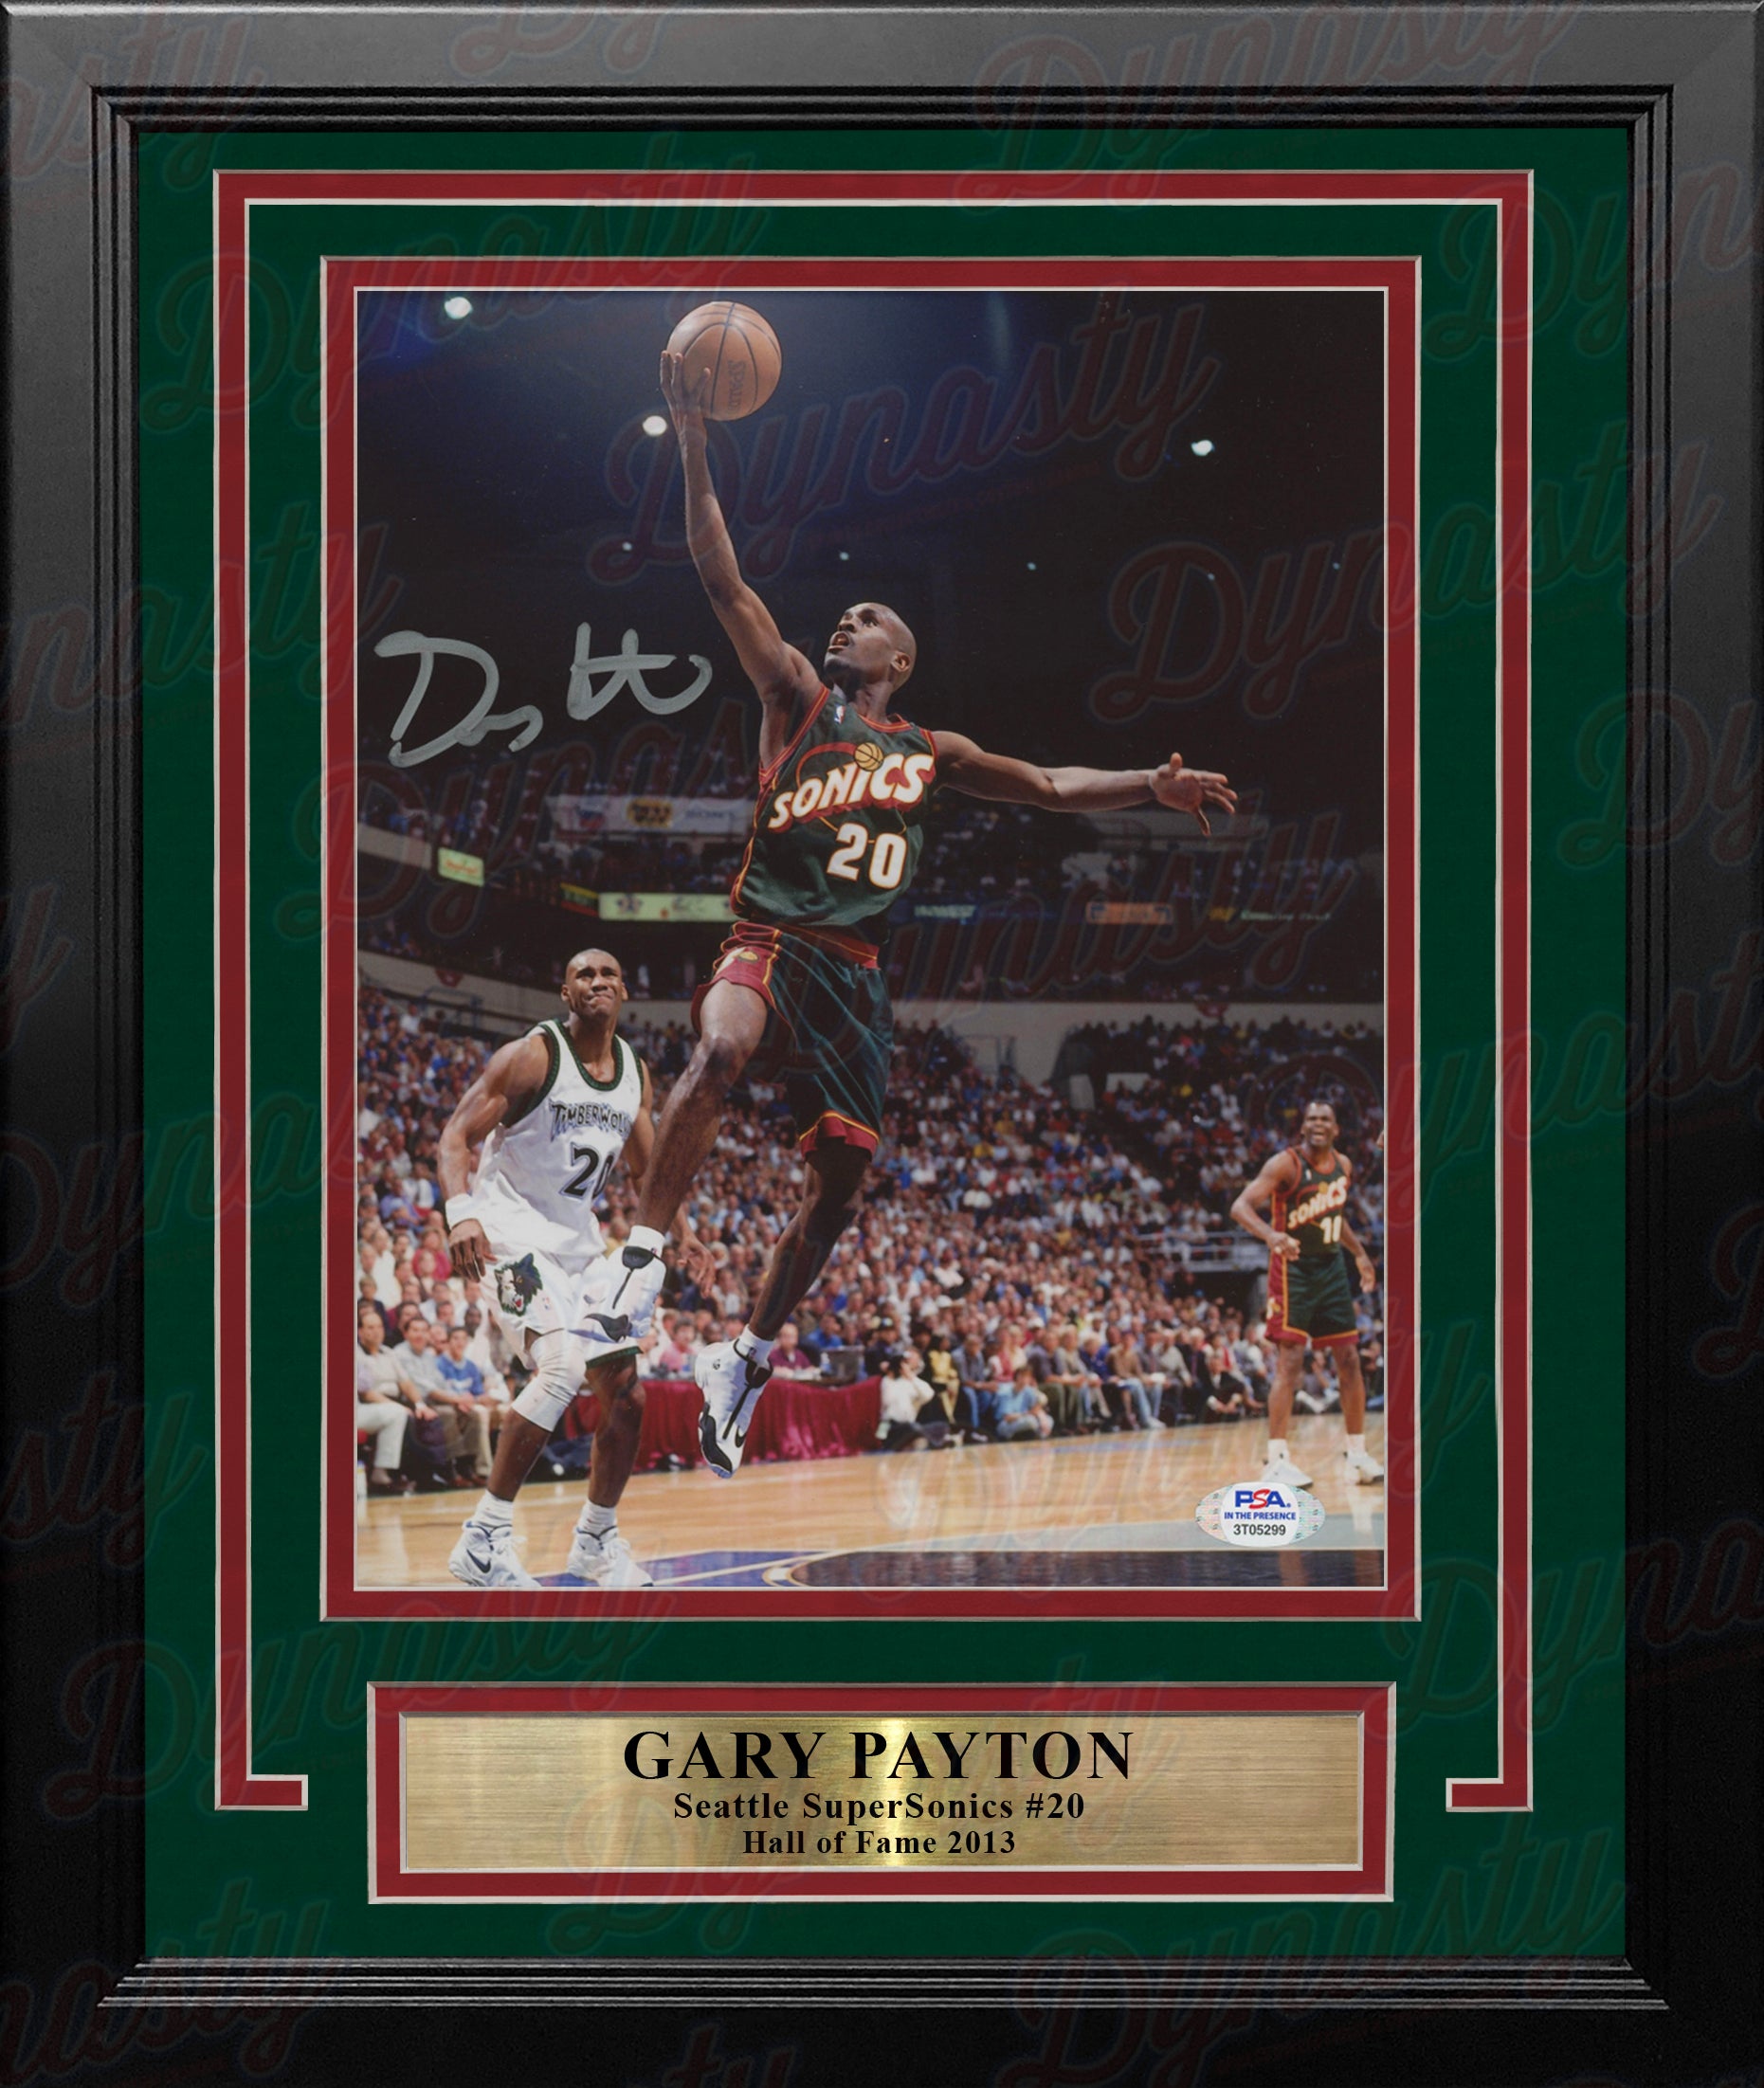 Gary Payton in Action Seattle SuperSonics Autographed 8" x 10" Framed Basketball Photo - Dynasty Sports & Framing 